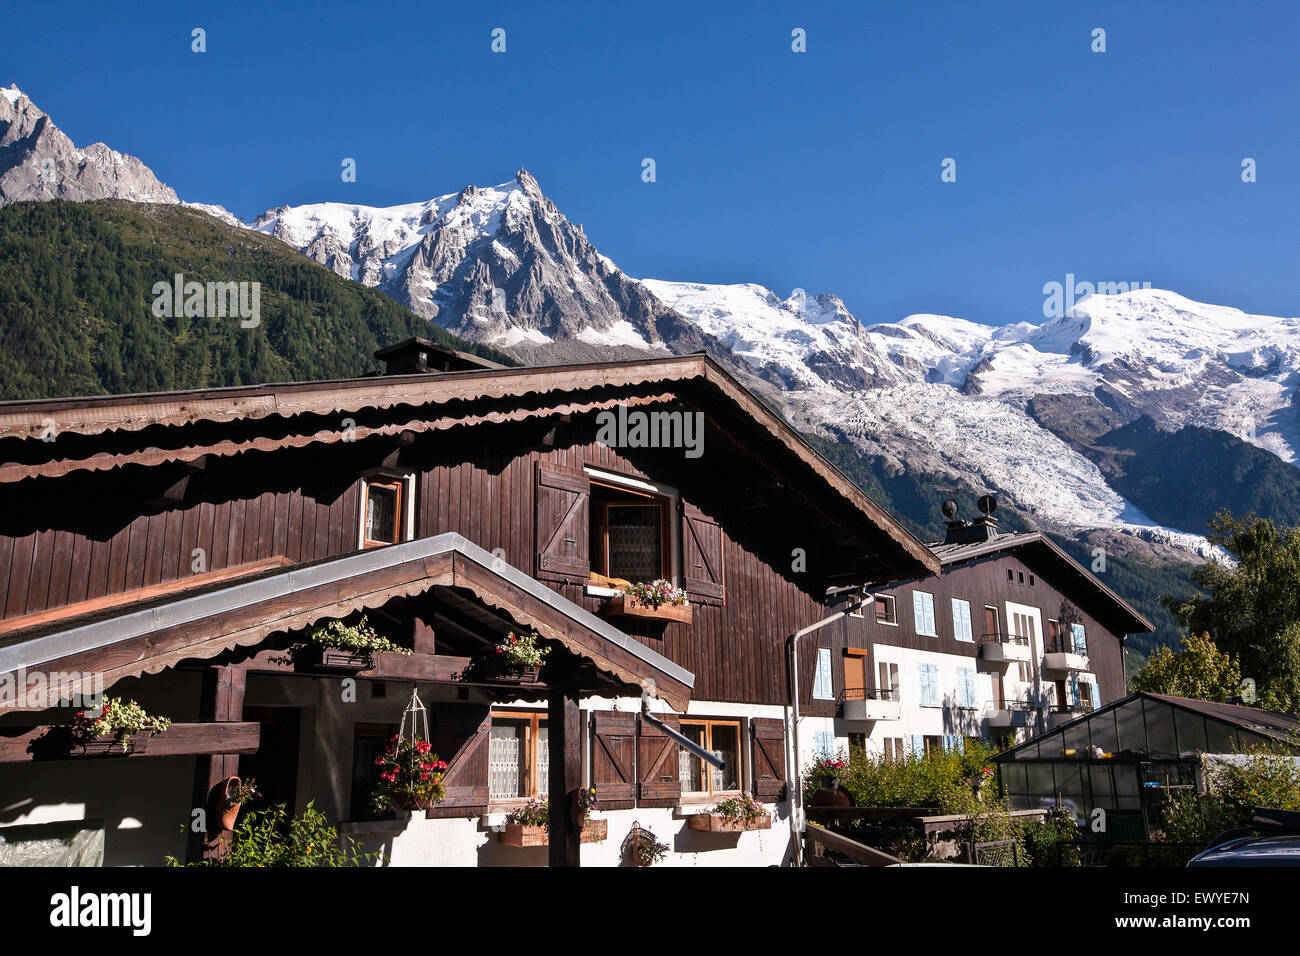 Chalet in Chamonix Mont Blanc valley, France. Stock Photo